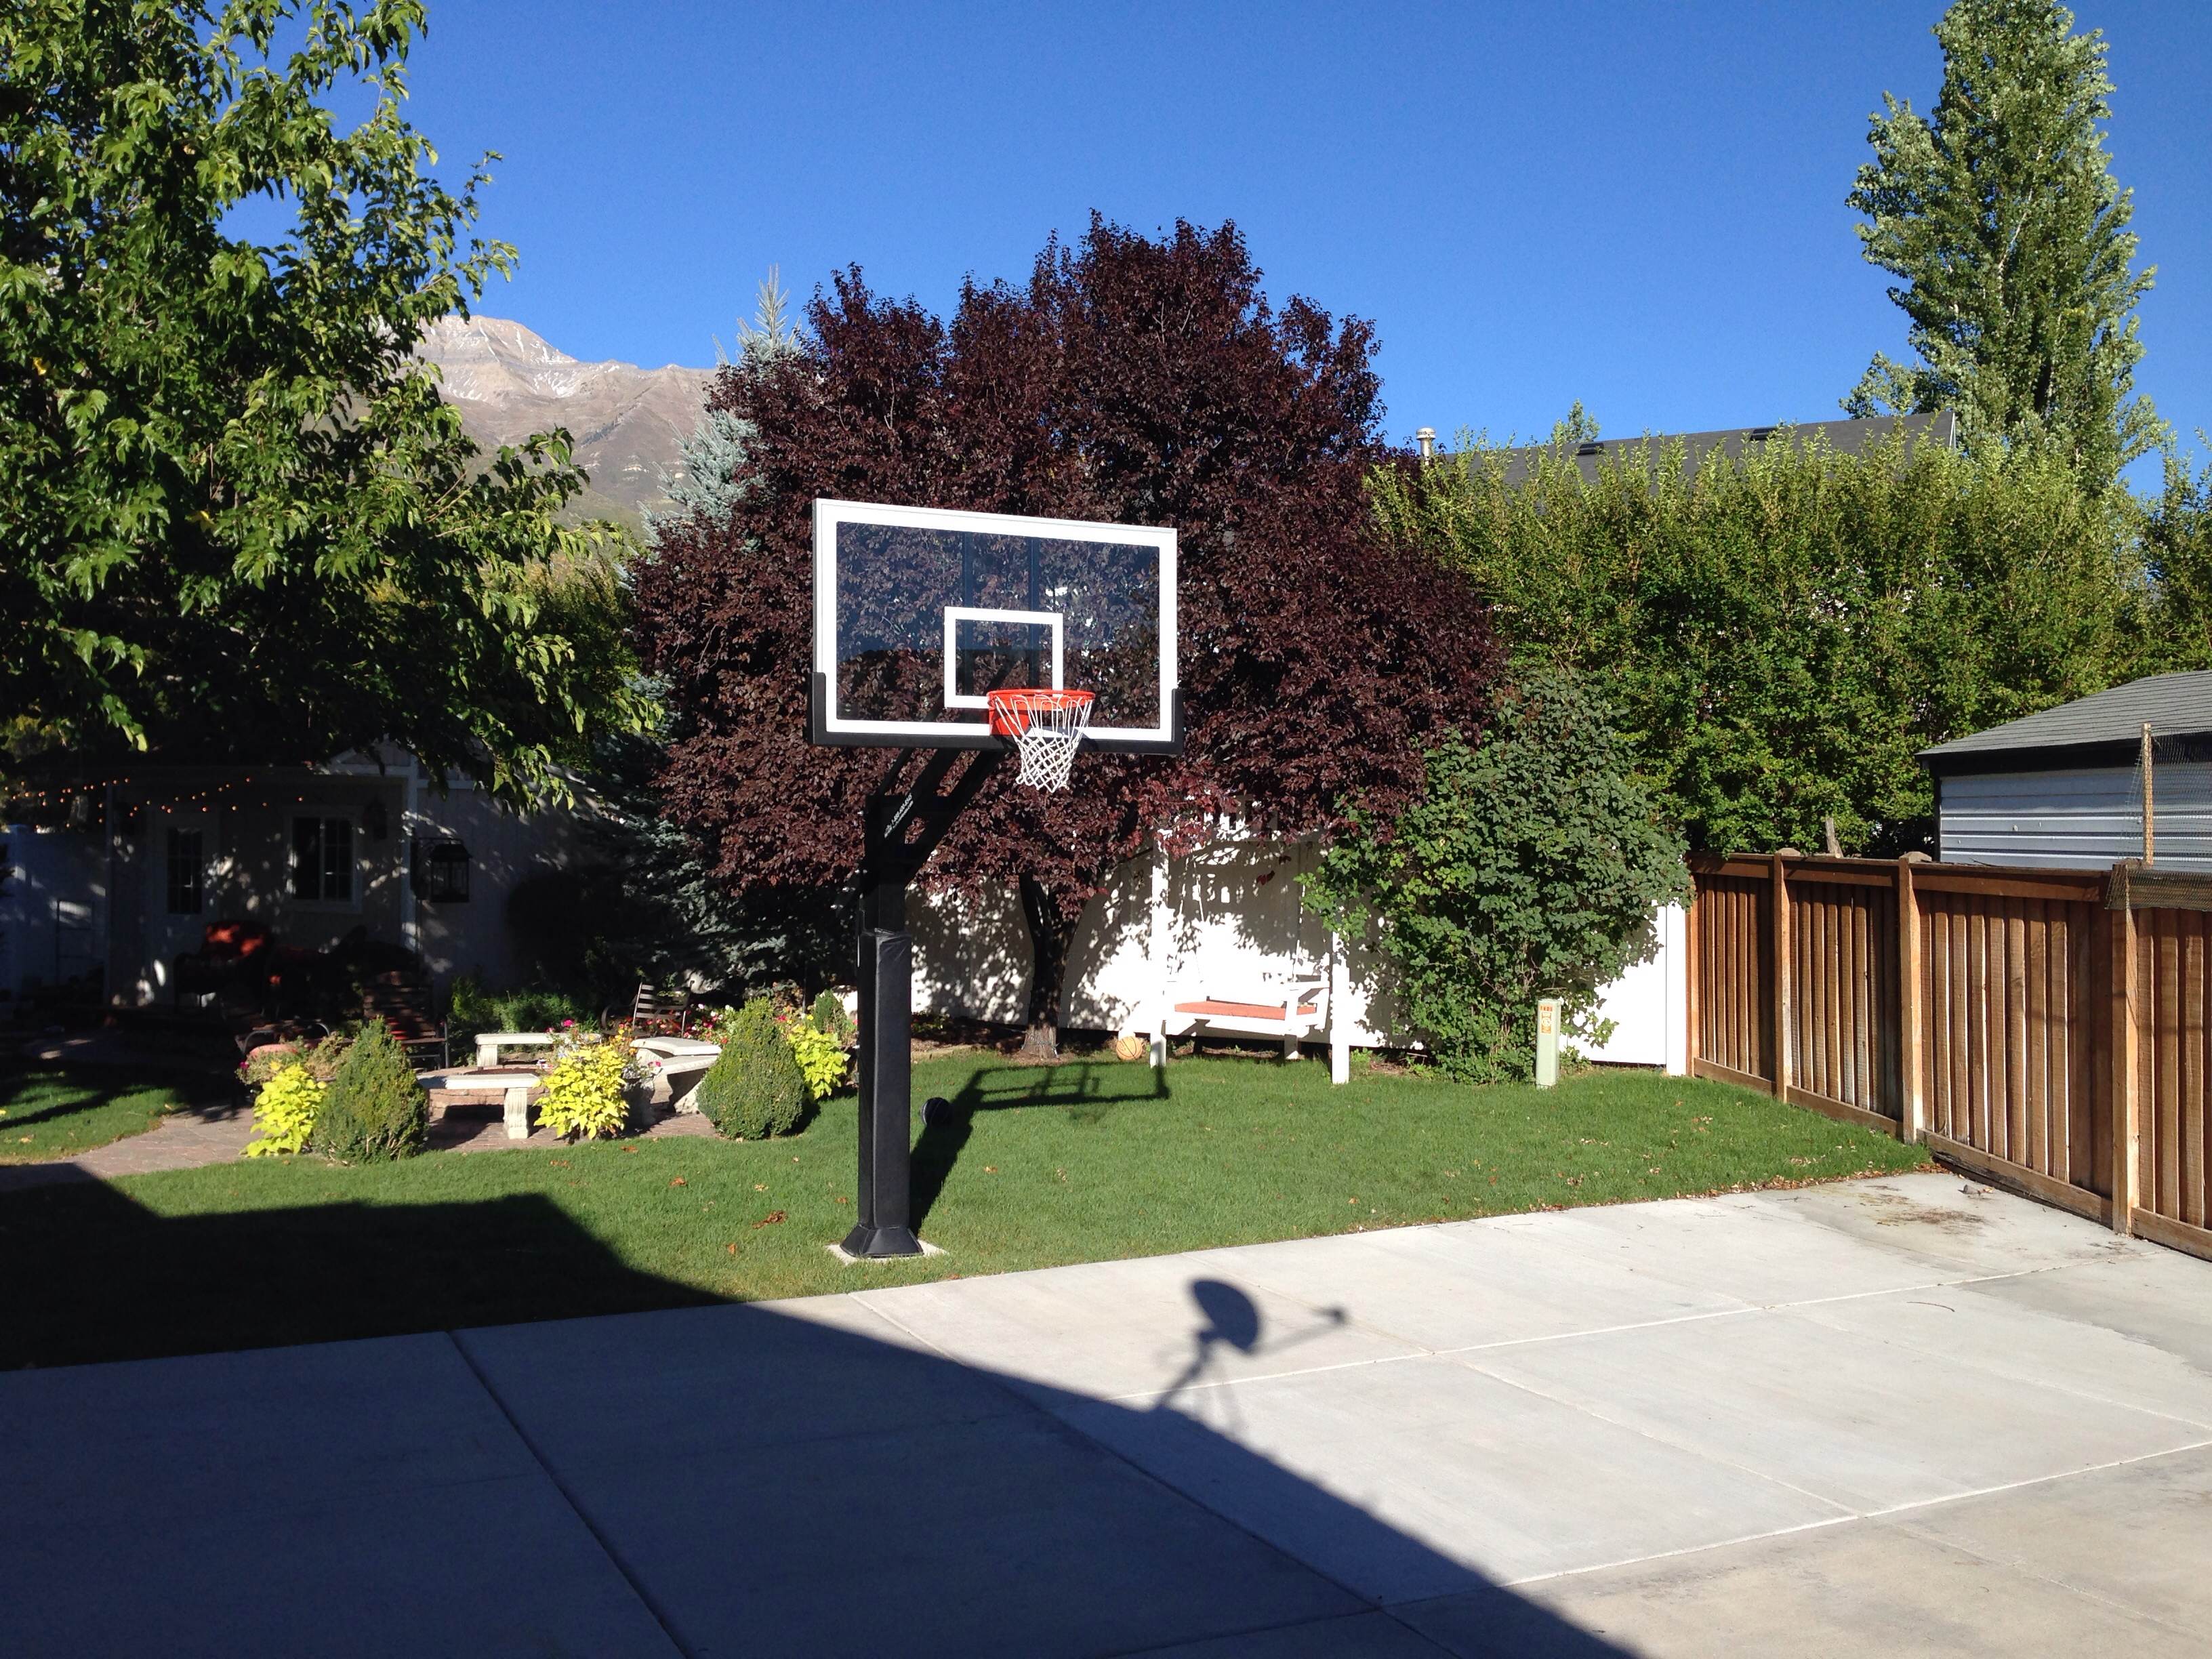 There is her Pro Dunk Platinum Basketball System that is, professionally assembled by her local professional installers, on the side of her large concrete slab court in the backyard of her nice residence.